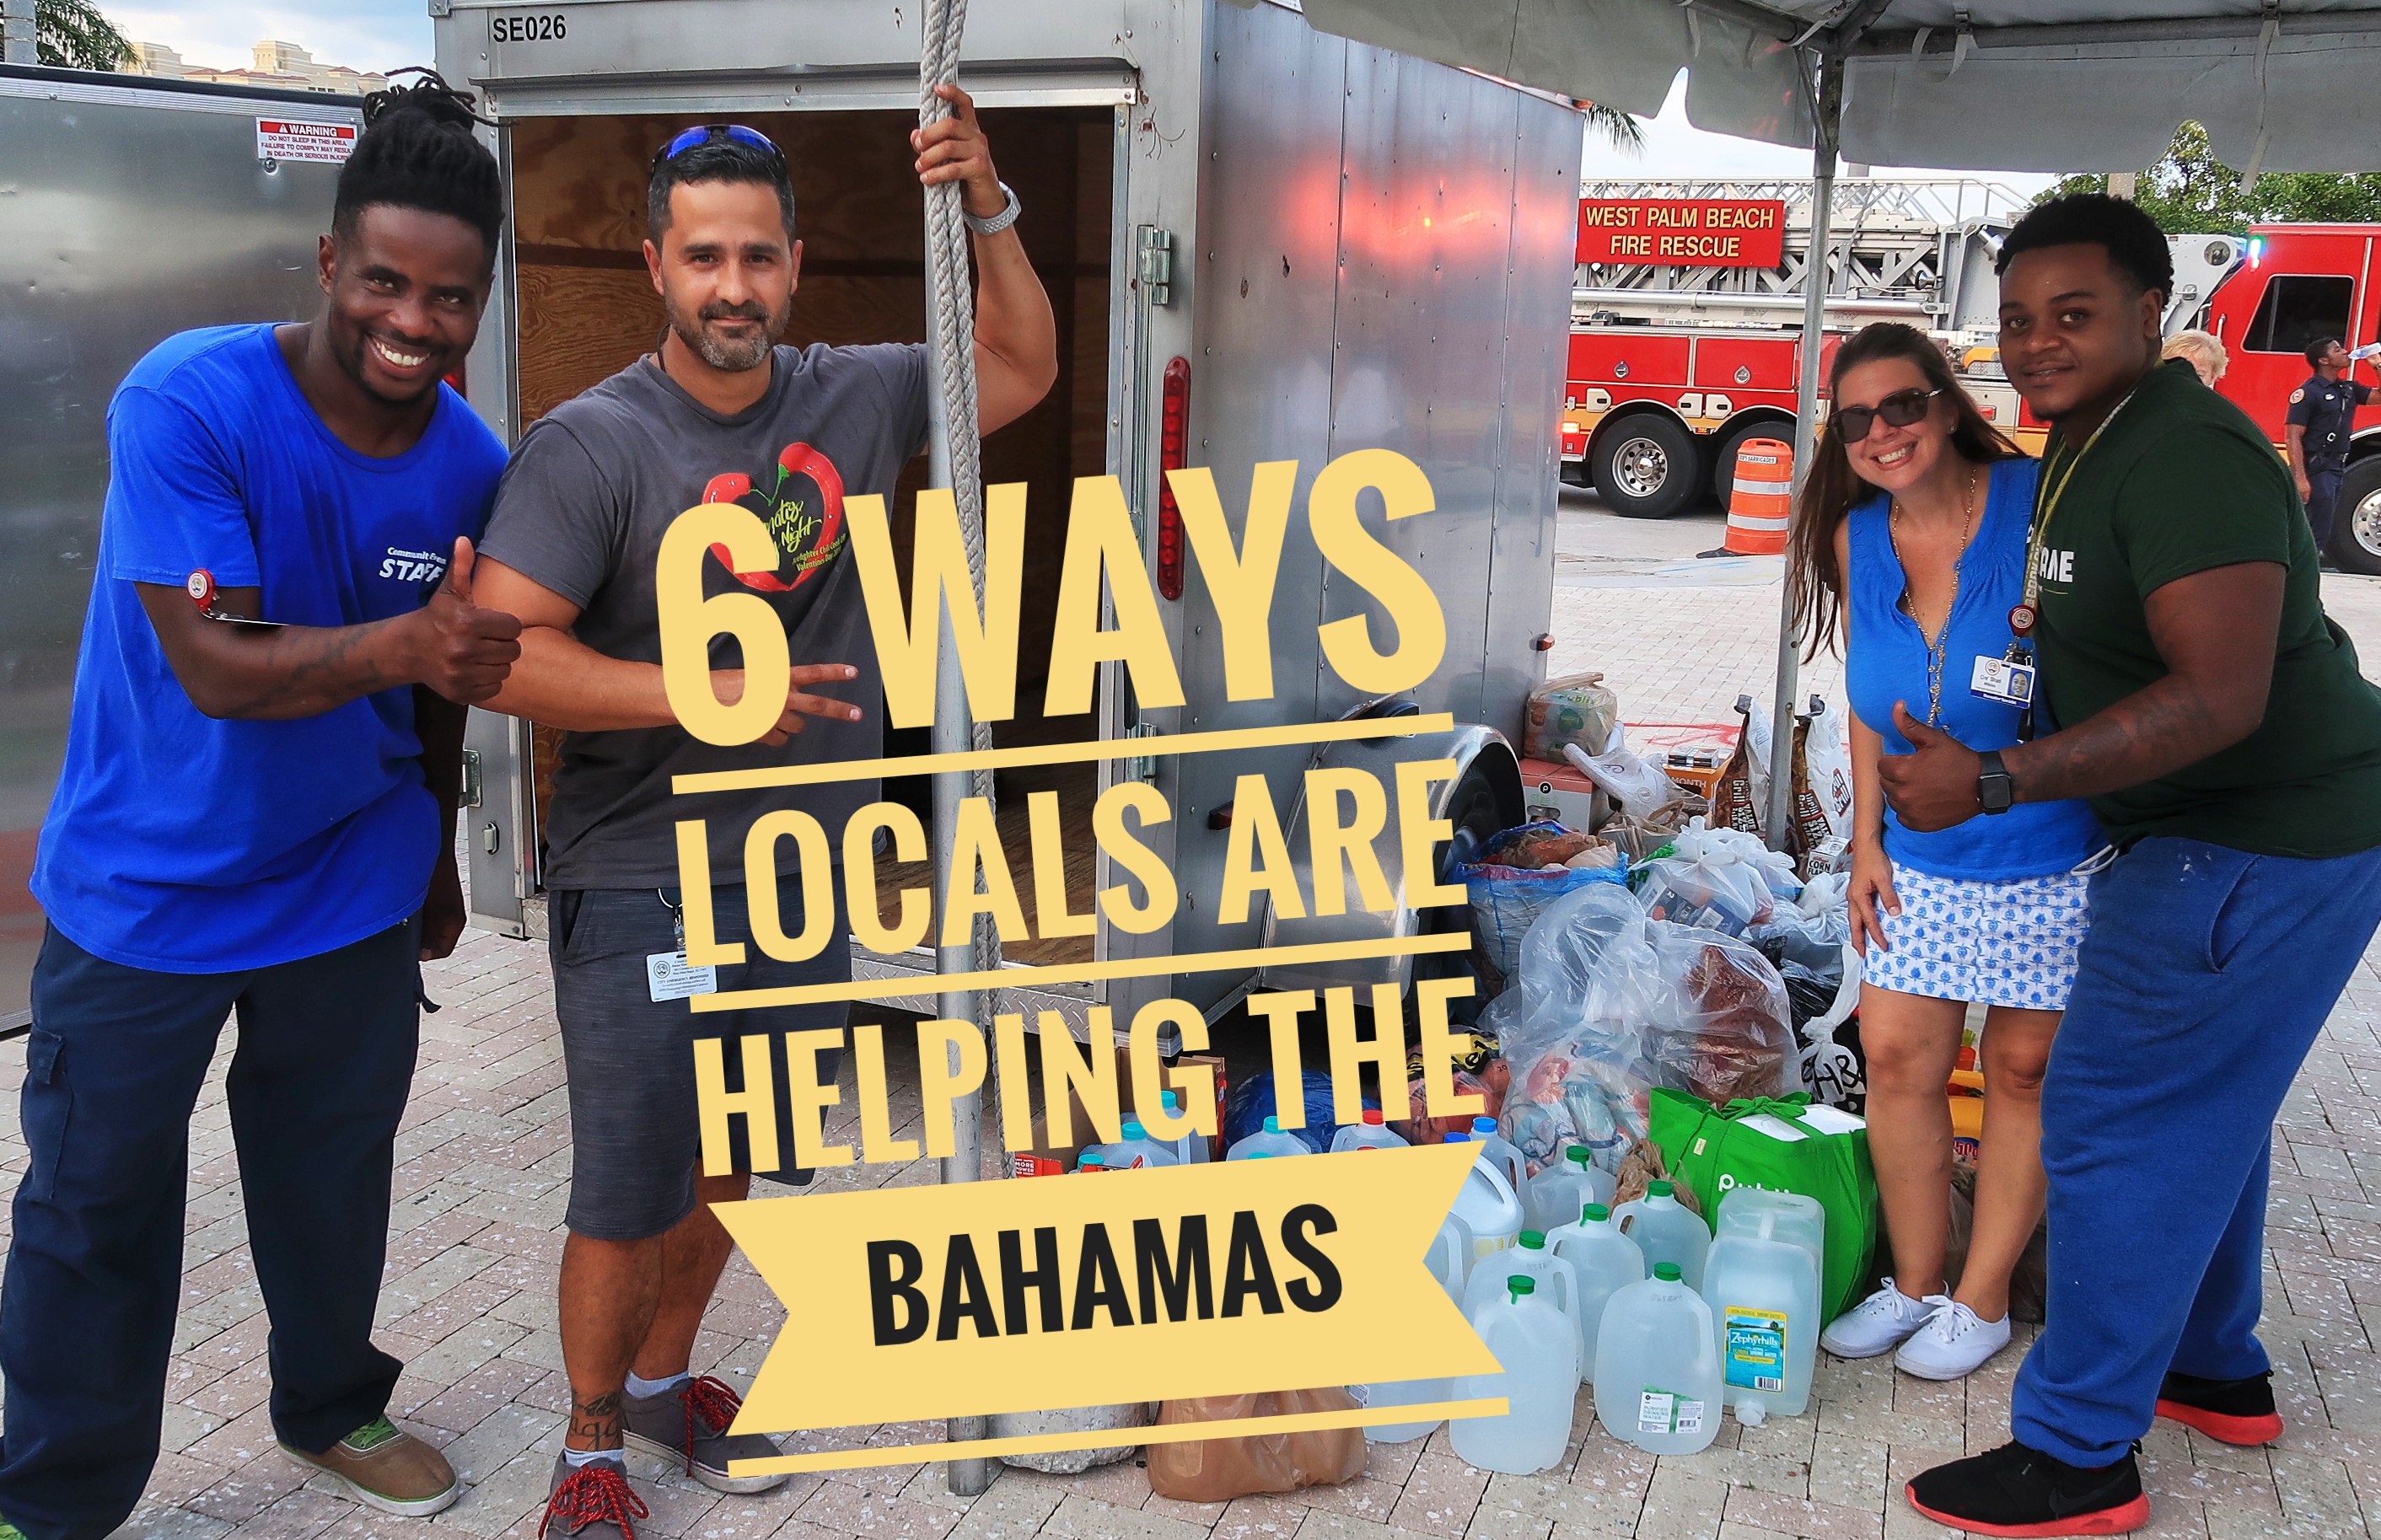 6 More Ways West Palm Beach locals are helping The Bahamas